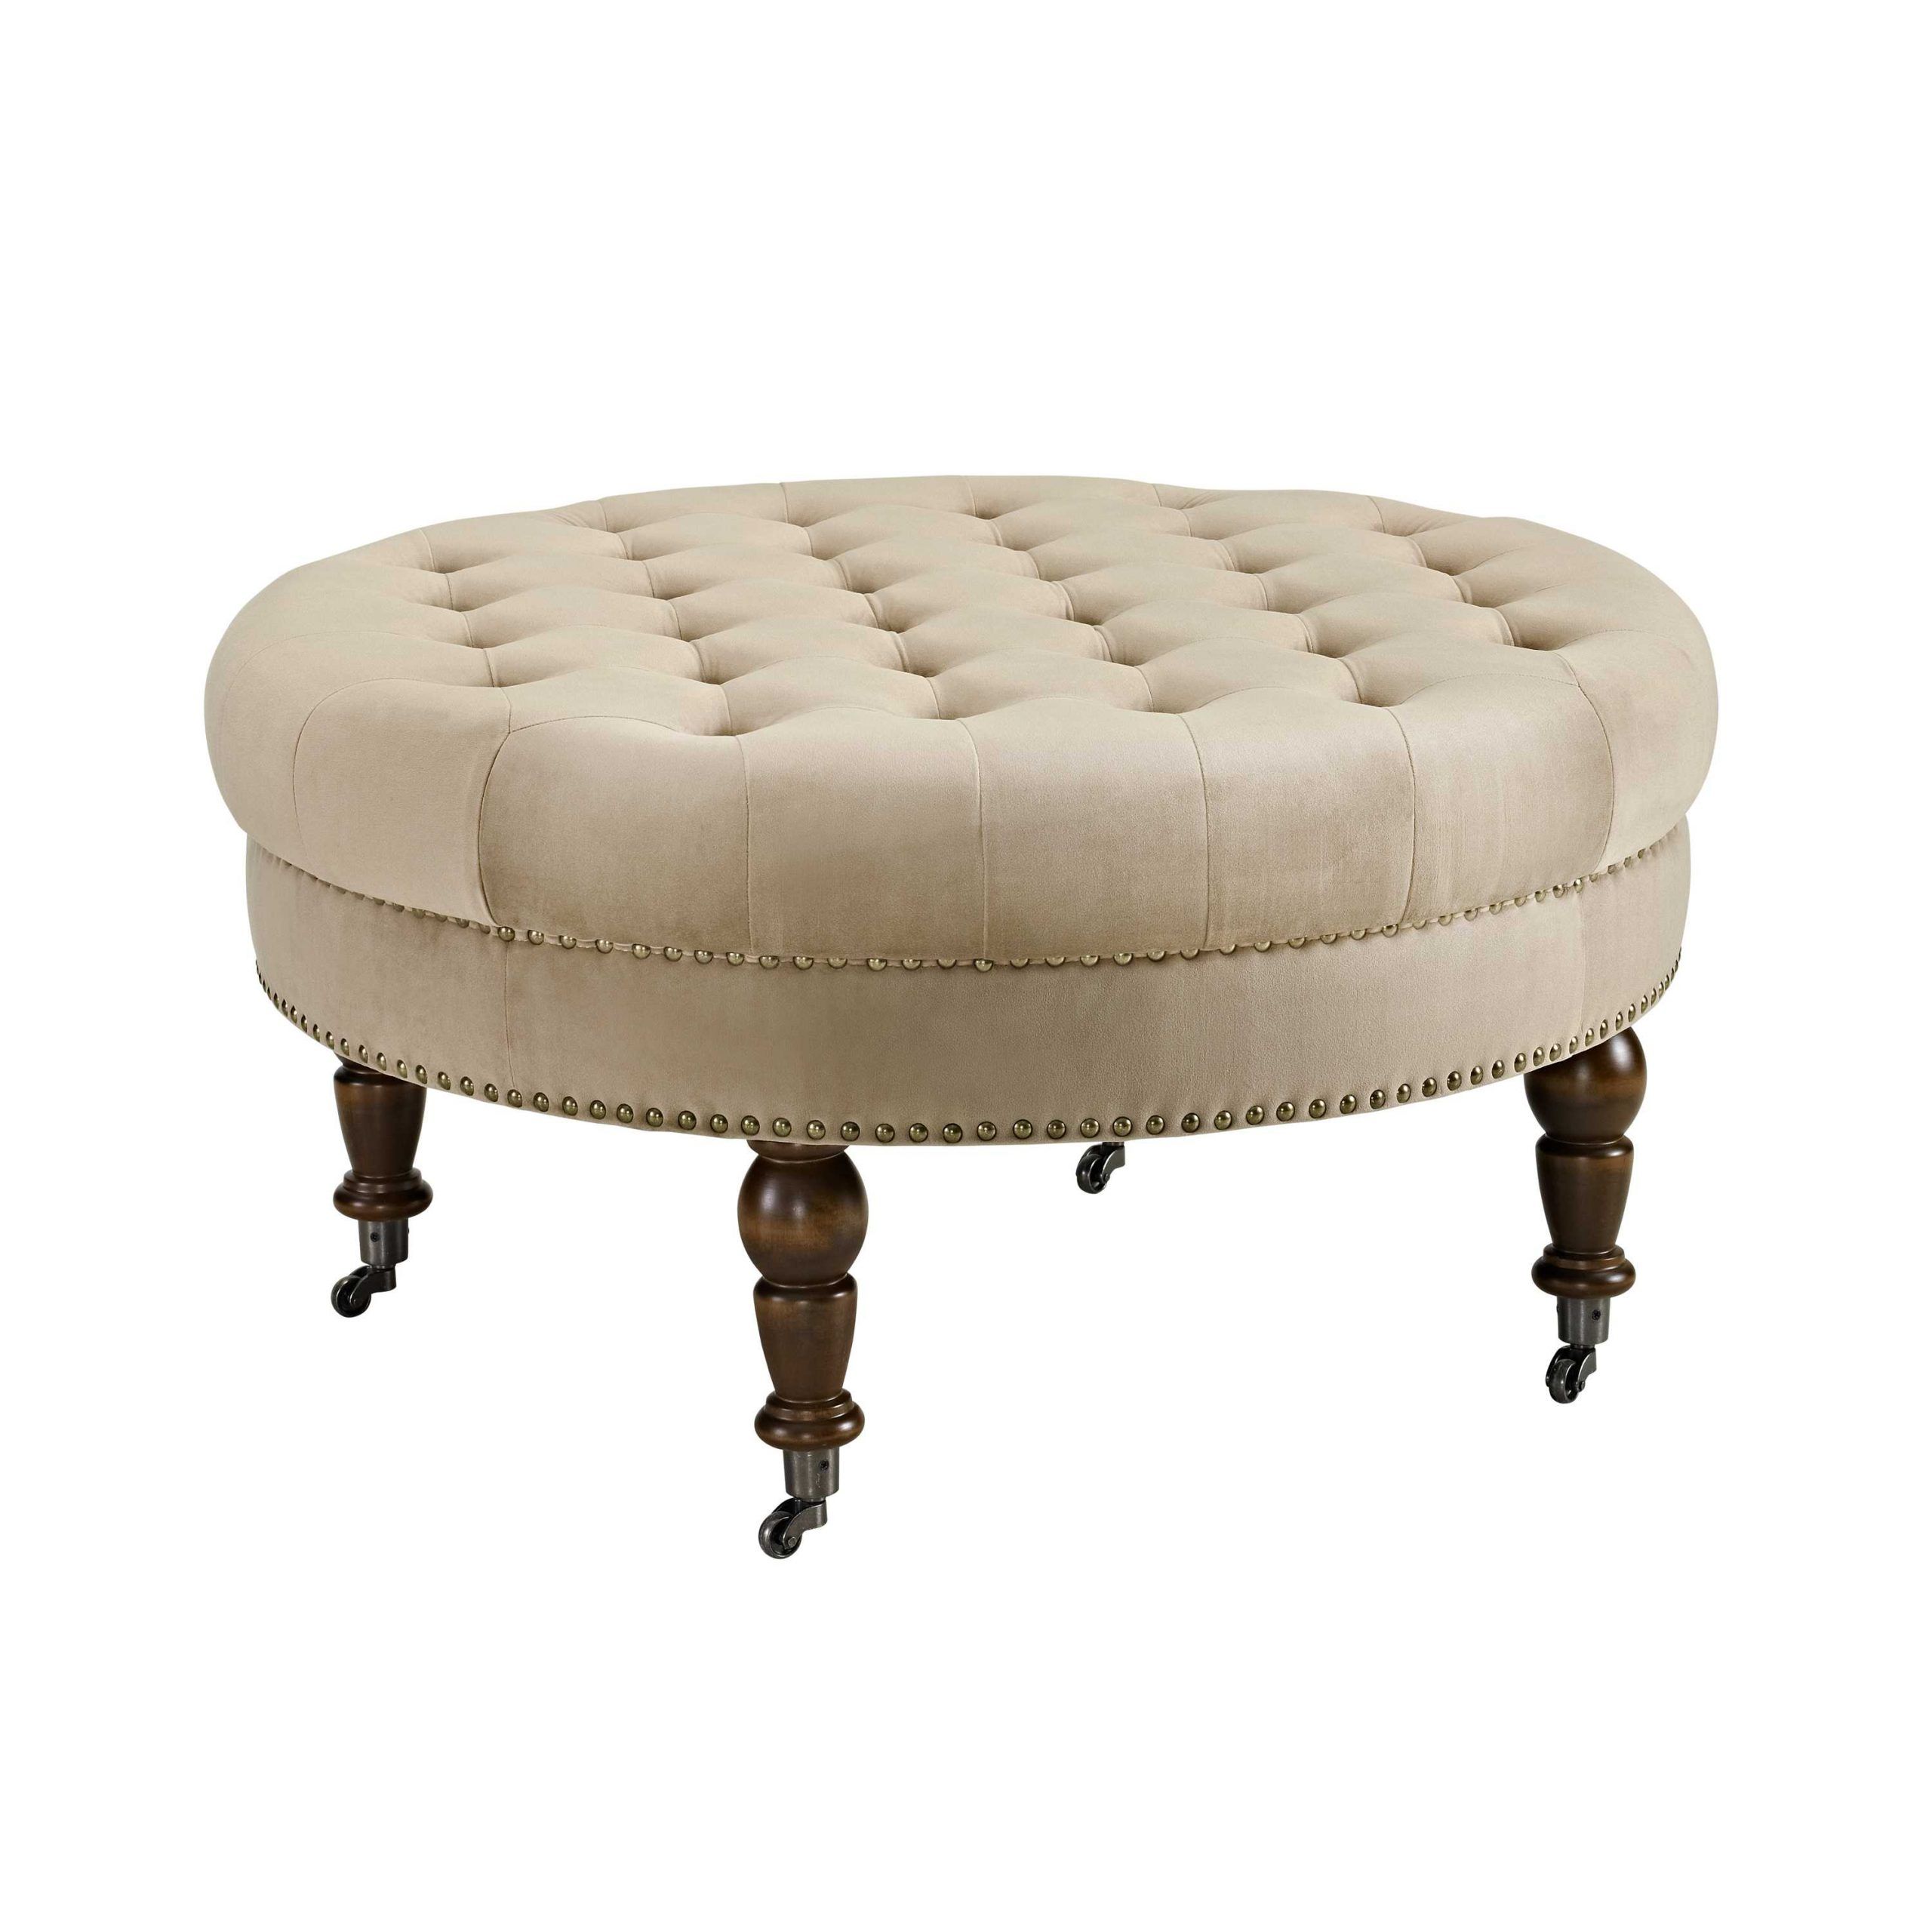 Homeroots Decor Velvet Upholstered Round Tufted Ottoman With Casters For Beige Cotton Pouf Ottomans (View 15 of 20)